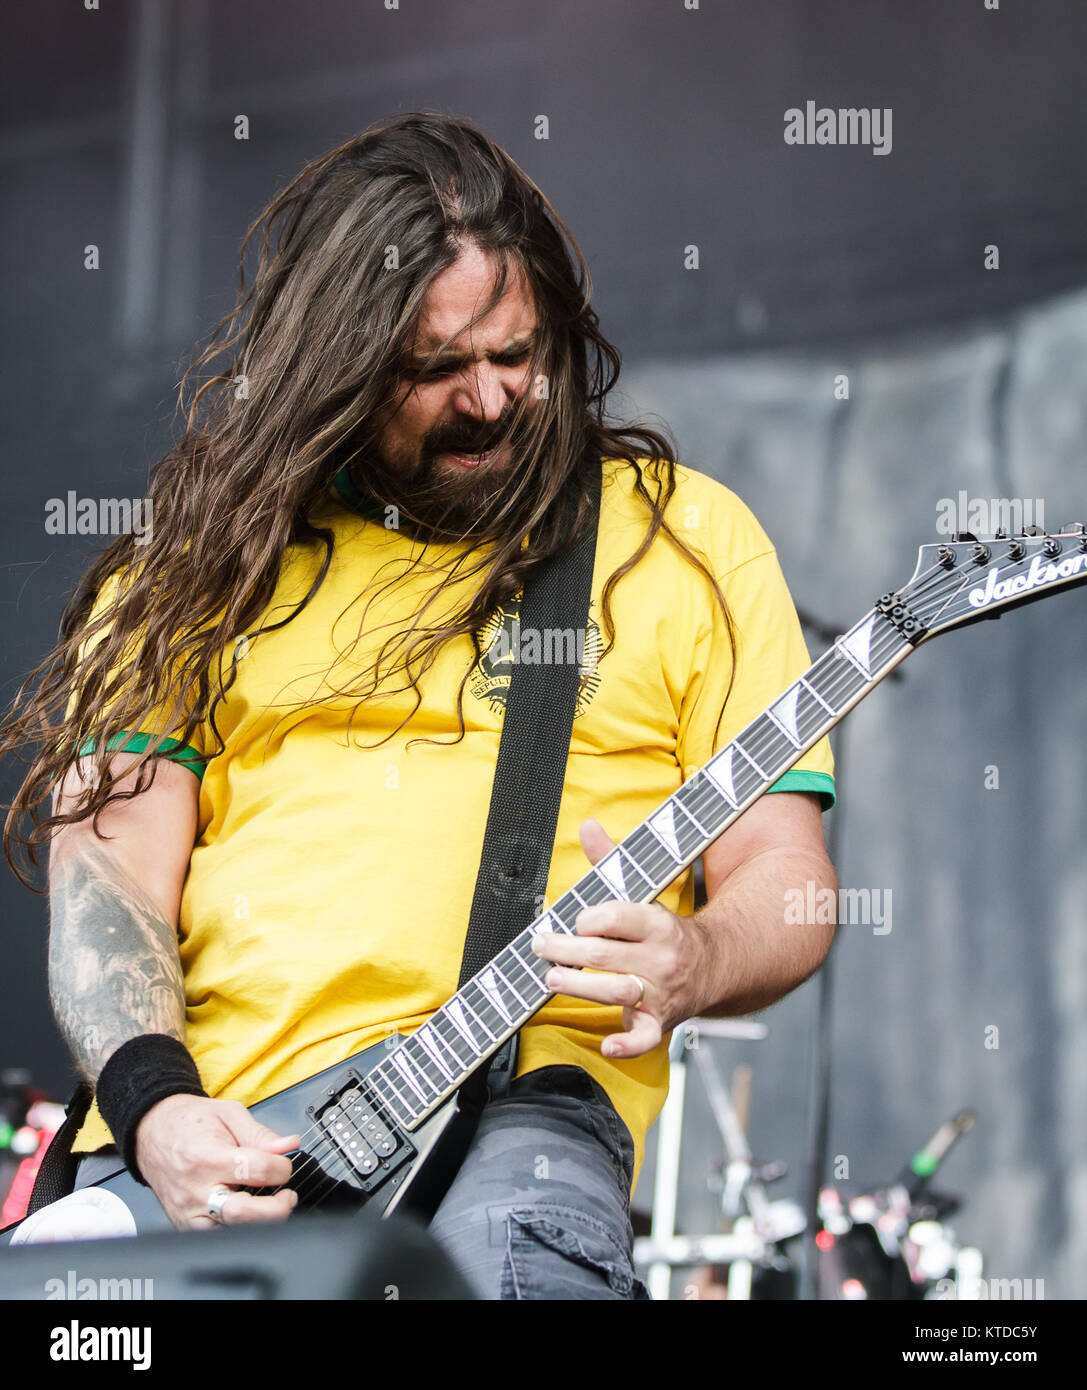 The Brazilian death and thrash metal band Sepultura performs a live concert at the Scandinavian heavy metal festival Copenhell 2014 in Copenhagen. Here guitarist Andreas Rudolf Kisser is seen live on stage. Denmark 12/06 2014. Stock Photo